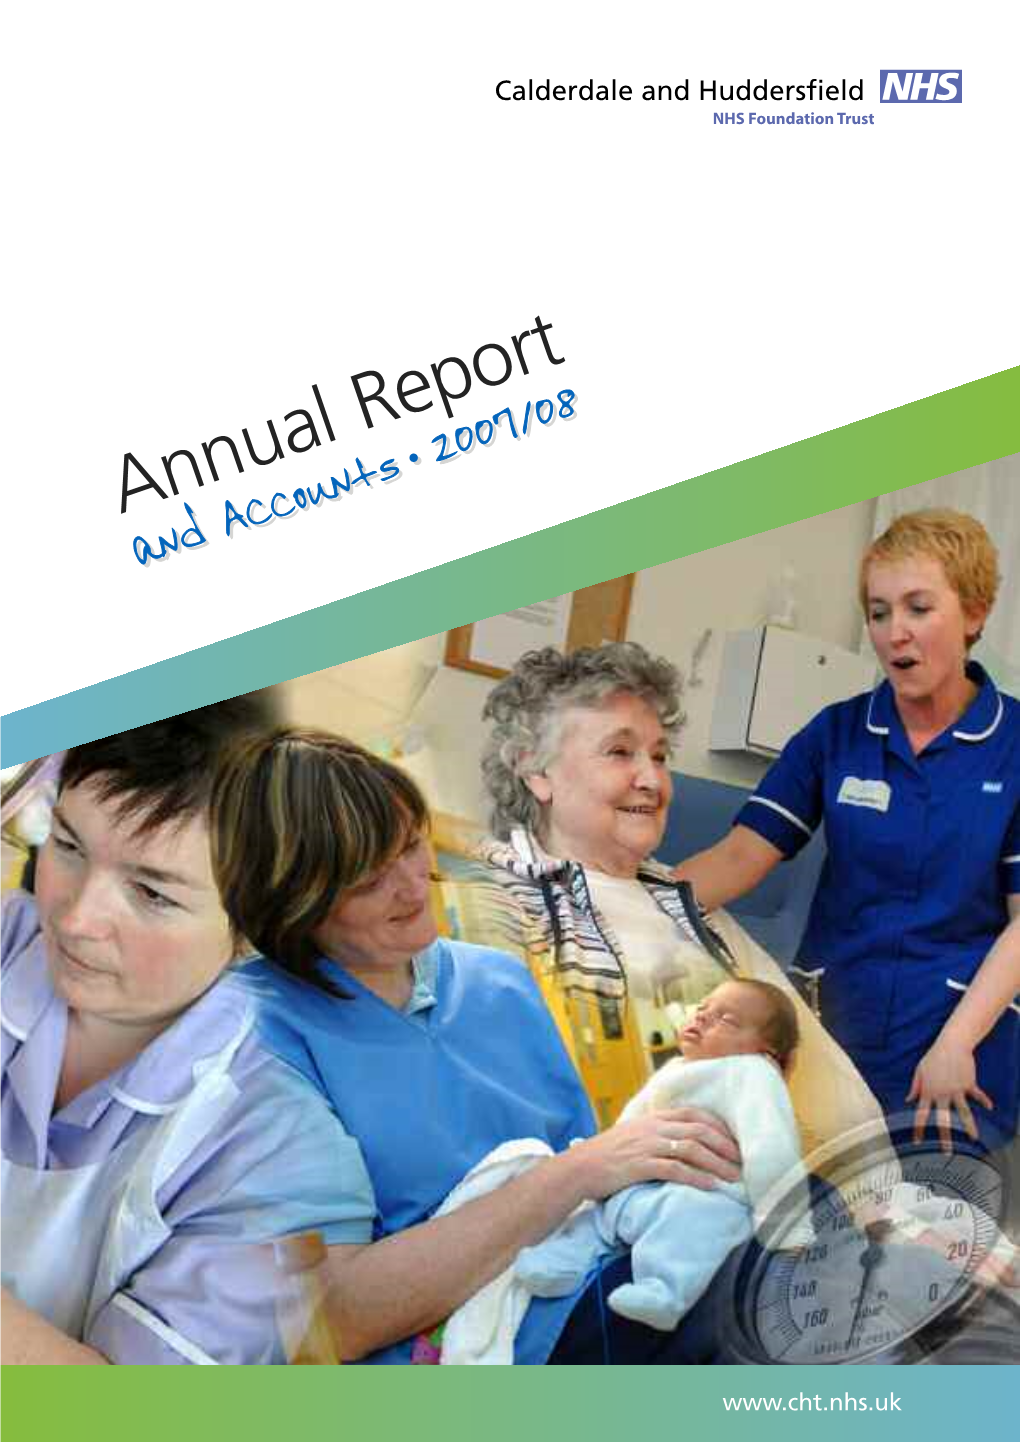 Full Annual Report and Accounts 2007/08